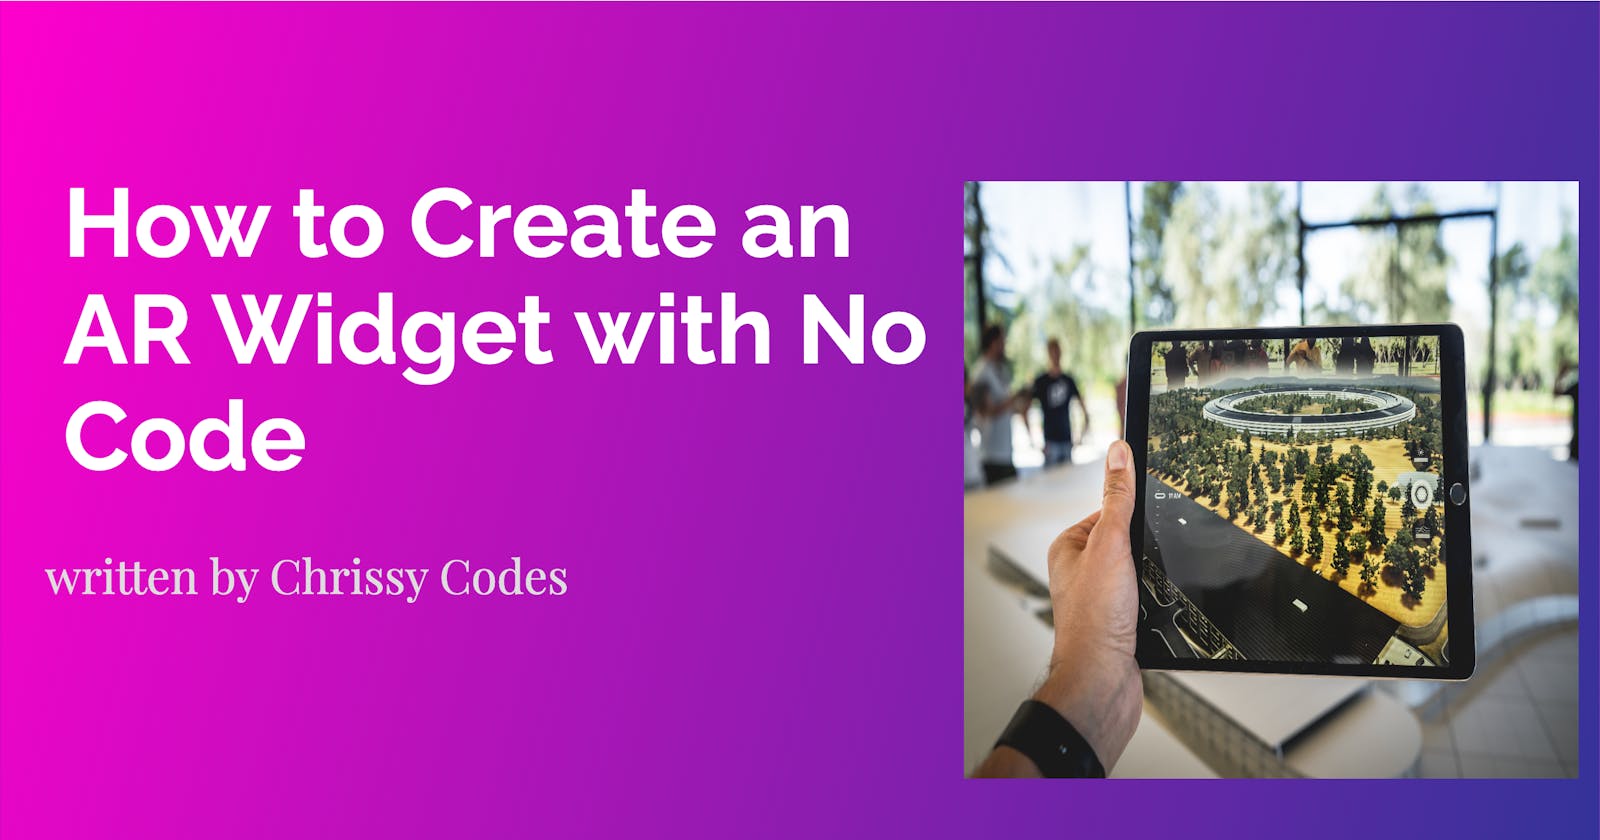 How to Create an AR Widget with No Code